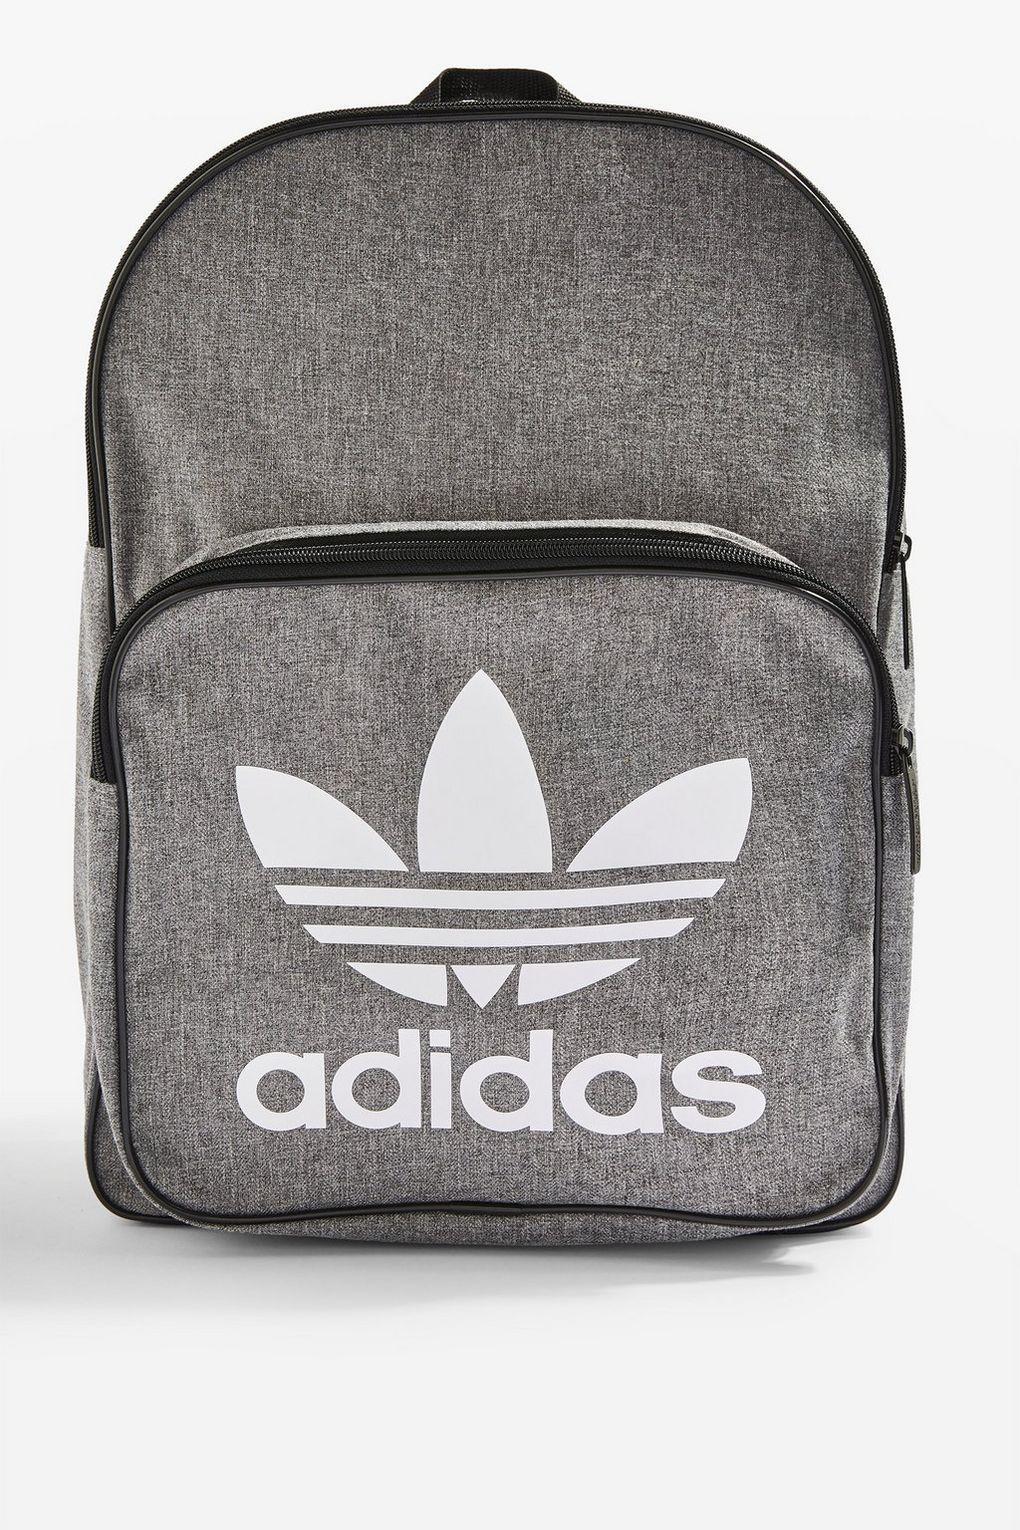 White Addidas Logo - Logo Backpack by adidas - Bags & Accessories- Topshop